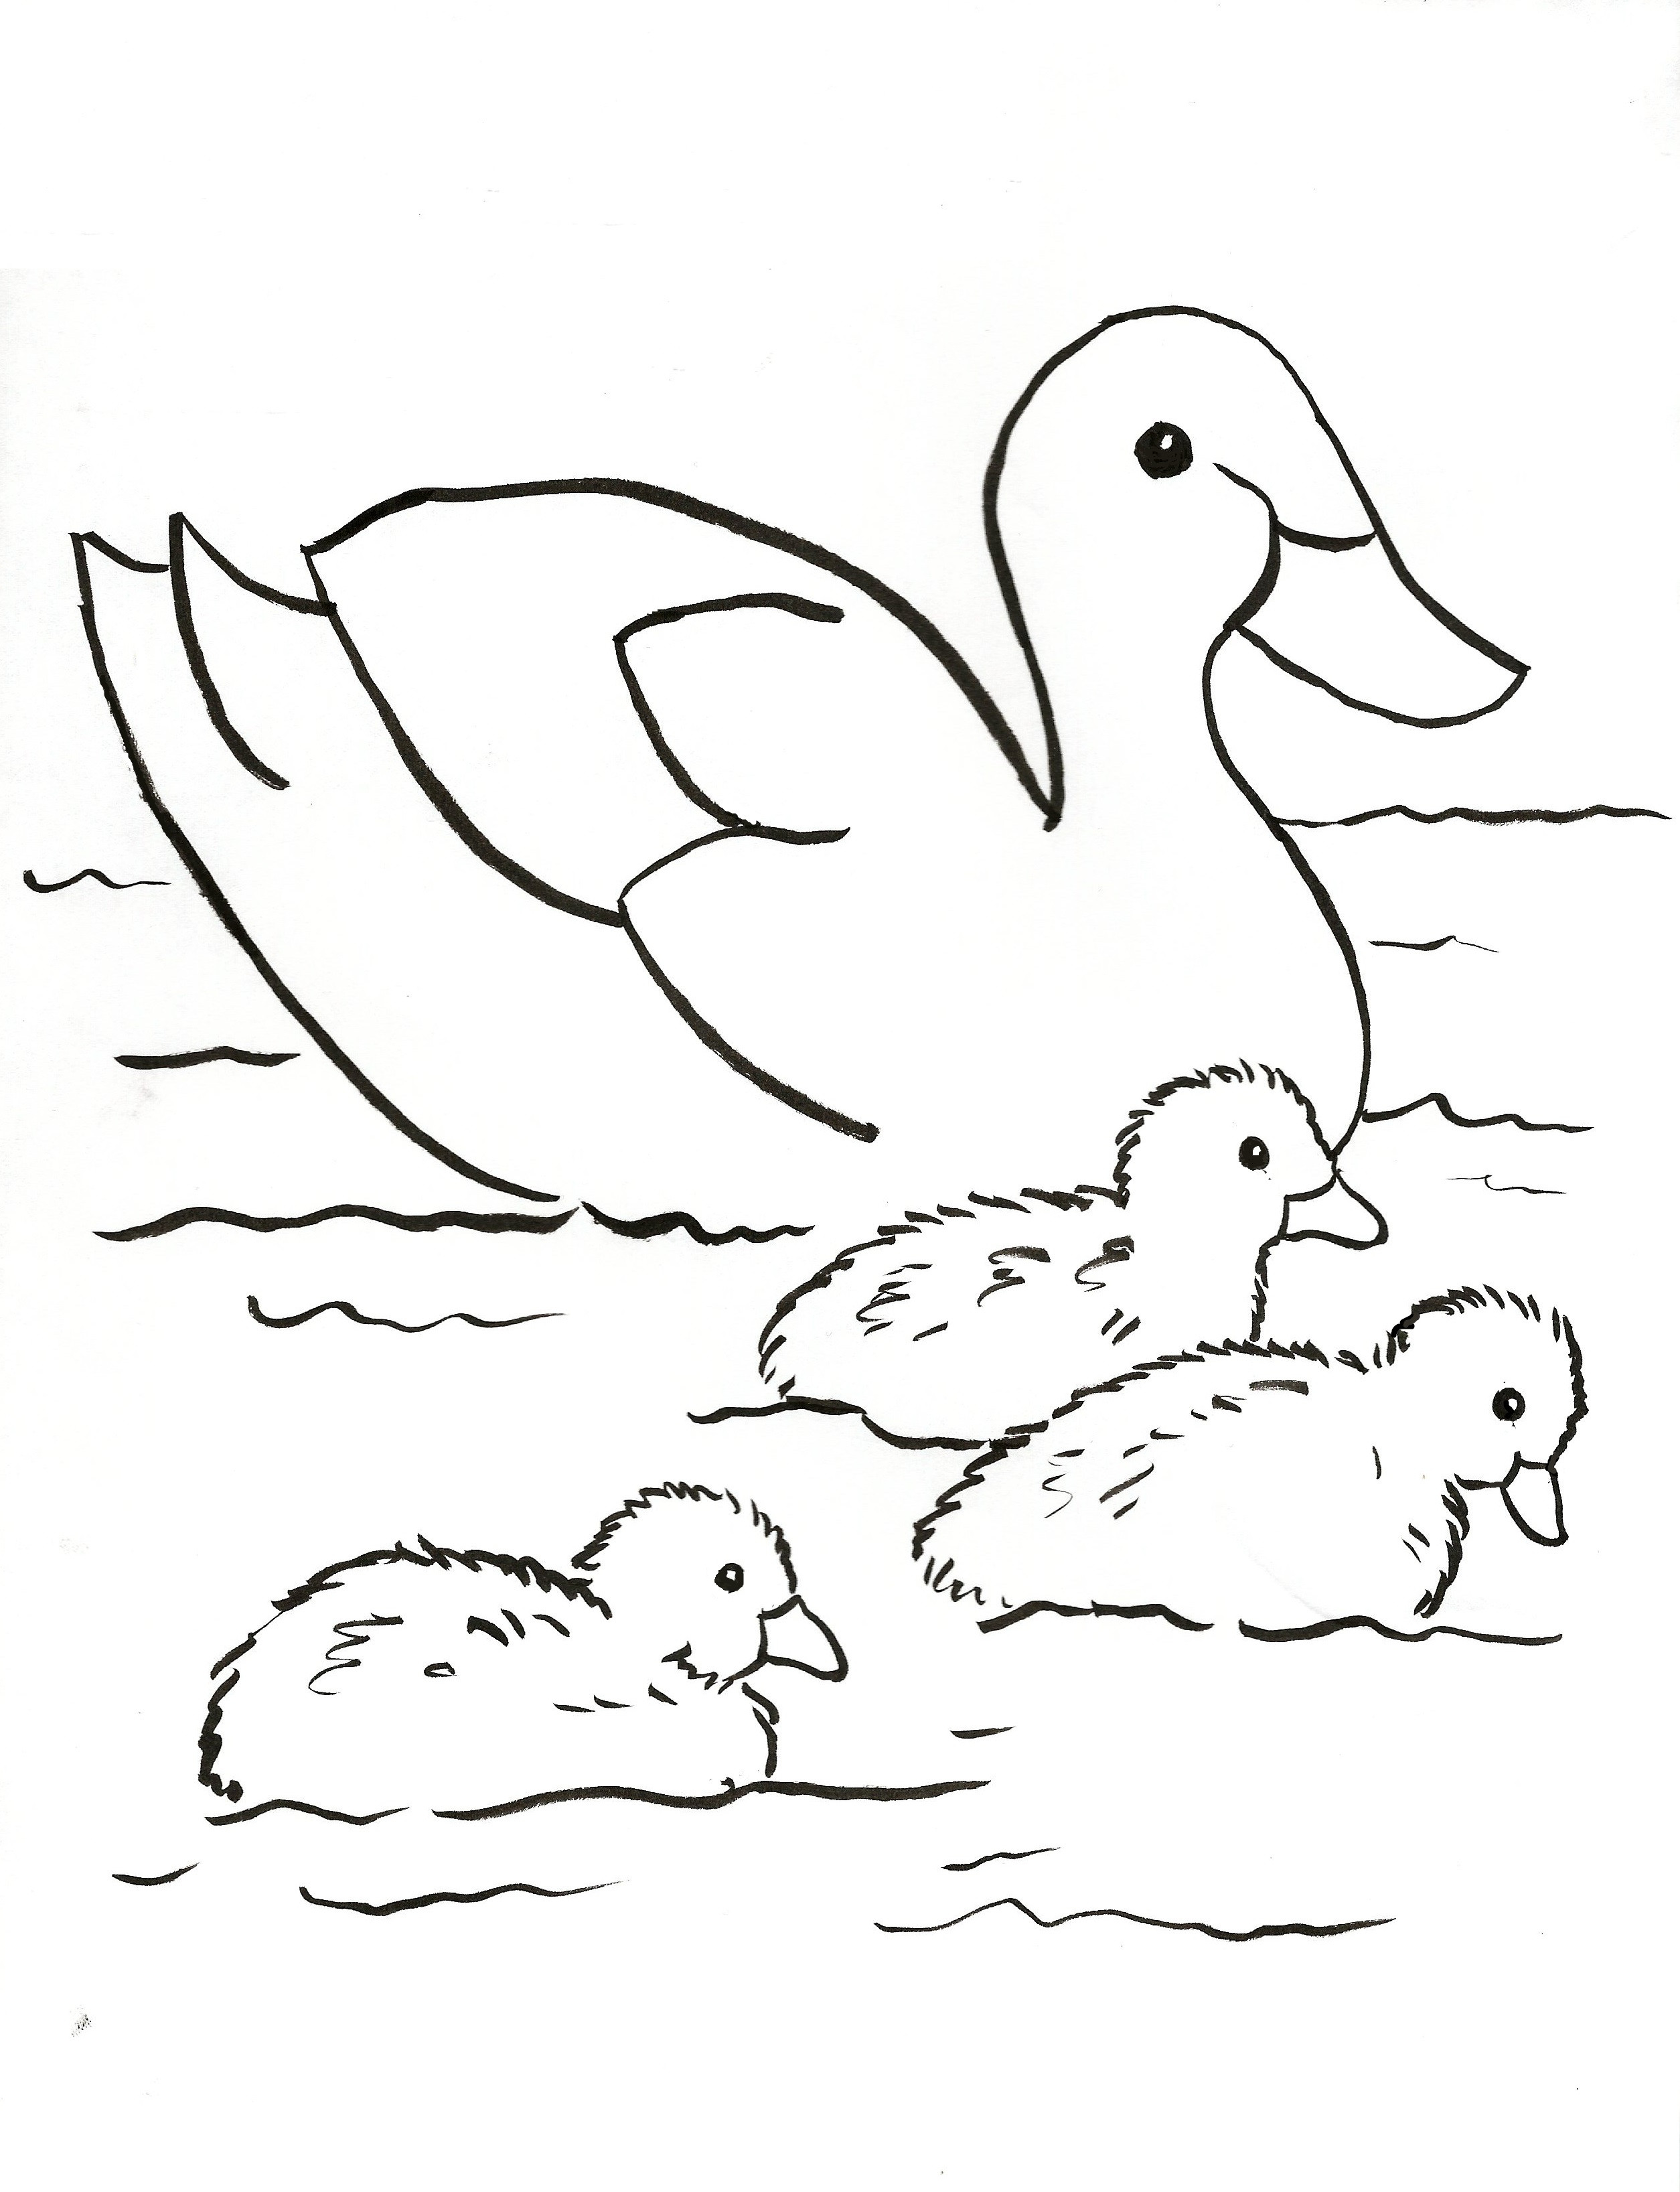 Ducks Coloring Pages
 Duck Family Coloring Page Samantha Bell